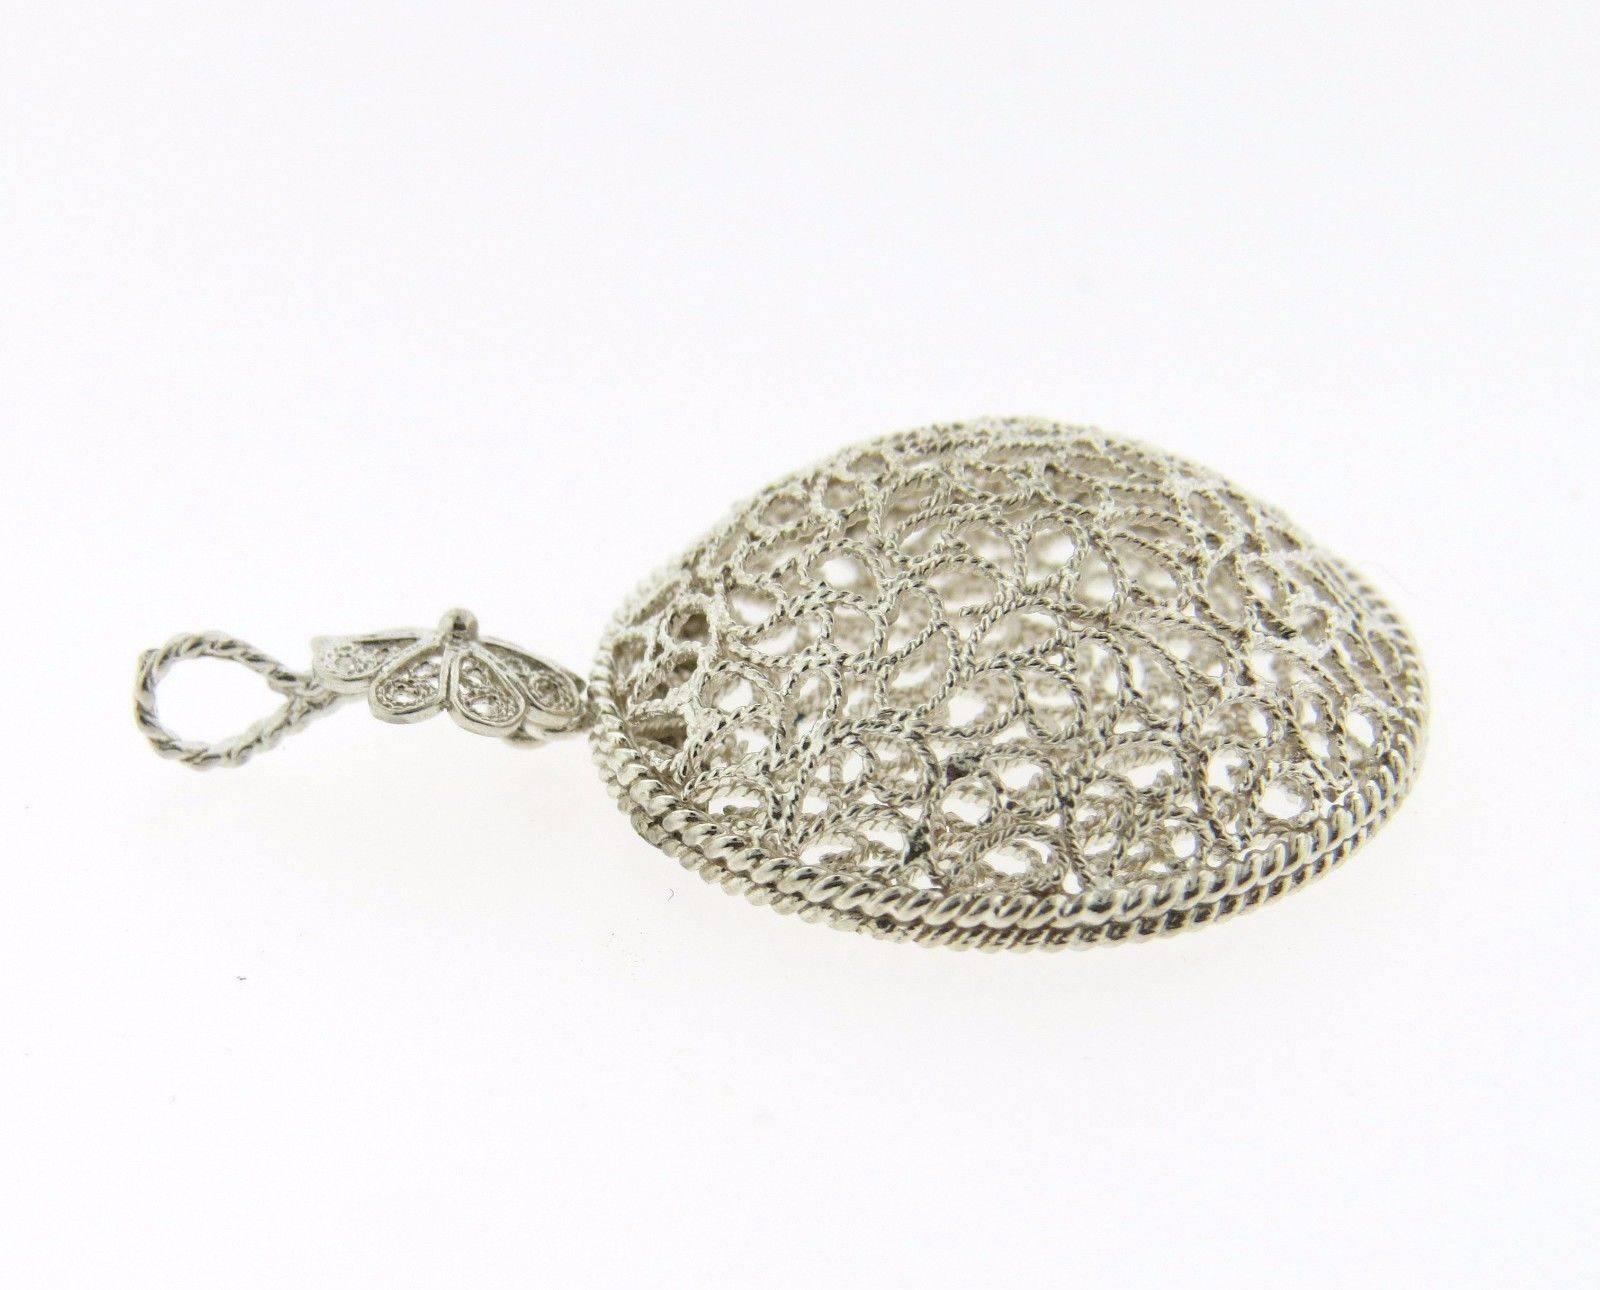 A sterling silver pendant by Buccellati.  The pendant measures 38mm long (including bale) x 25mm.  Marked: Buccellati, 750.  The weight of the pendant is 3.3 grams. Comes with original Buccellati paperwork.